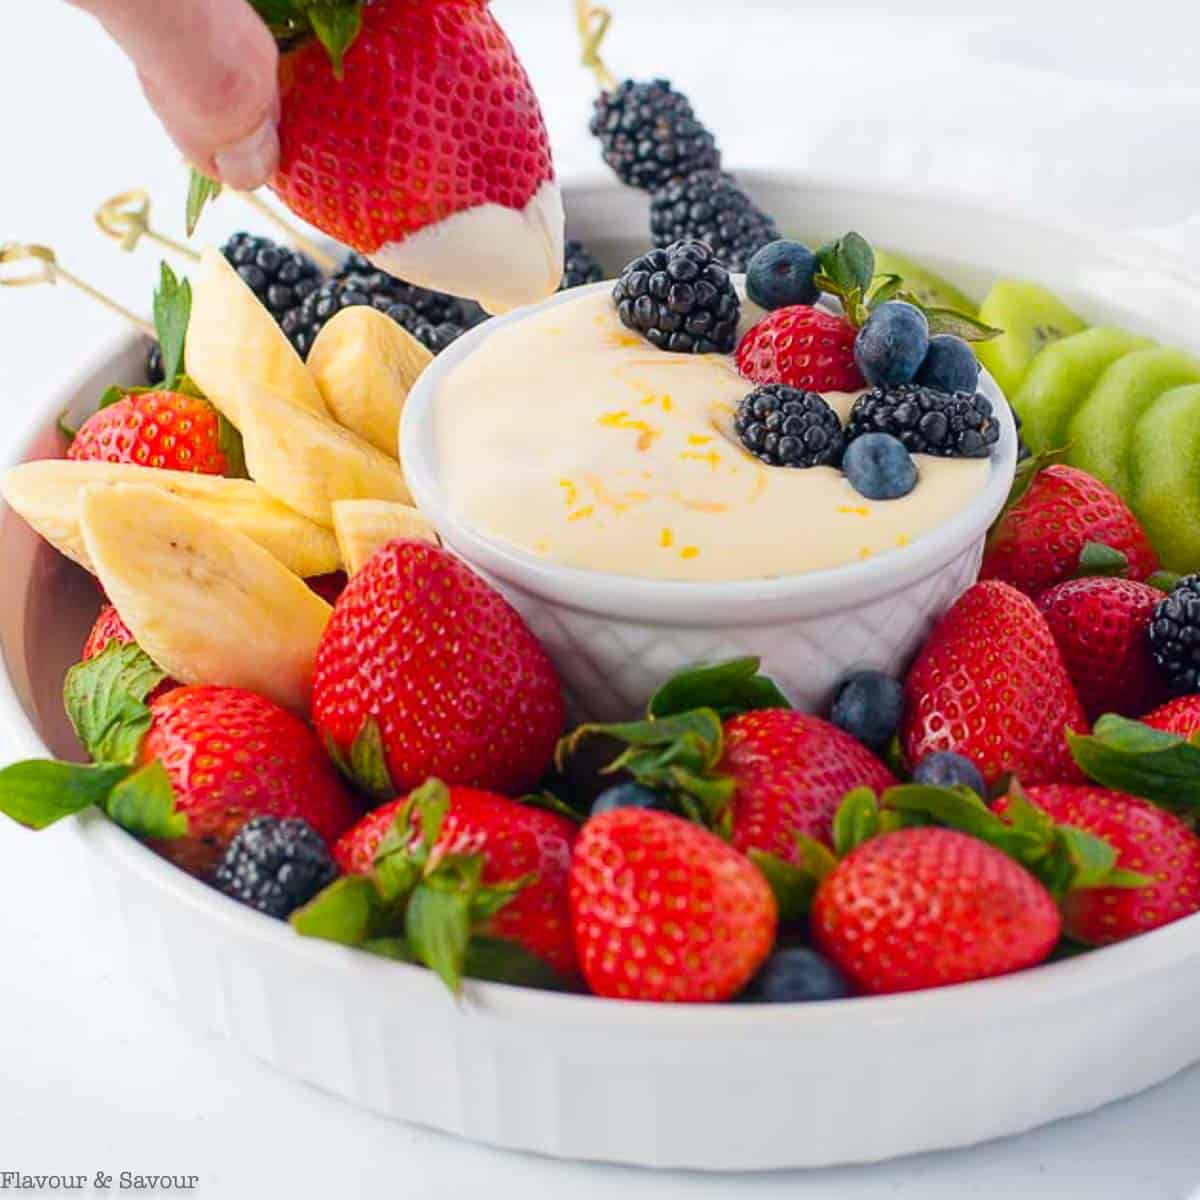 A hand dipping a strawberry into a small bowl of lemon curd fruit dip.